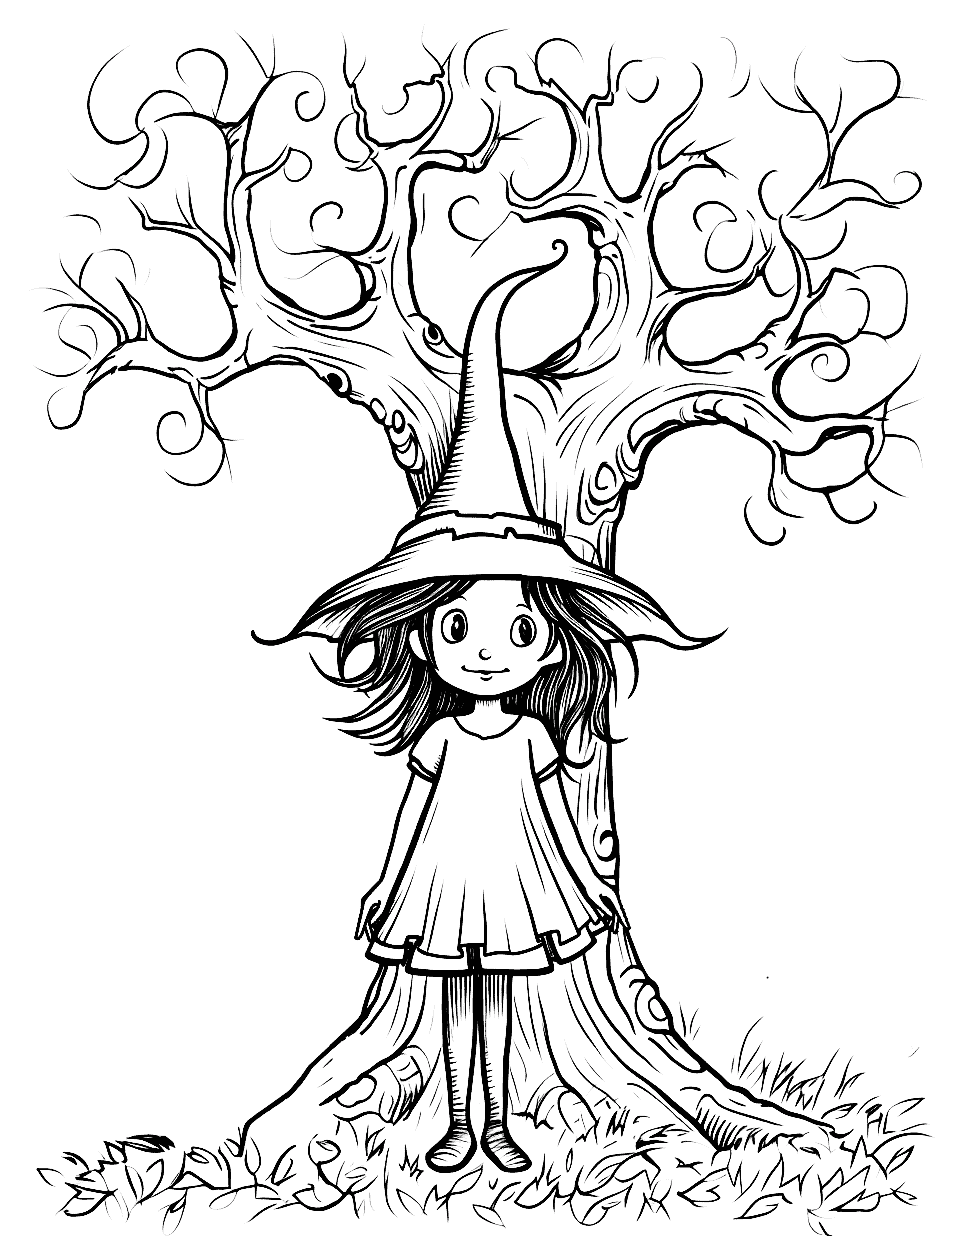 Witch and the Enchanted Tree Coloring Page - A witch and a large tree in a magical forest.